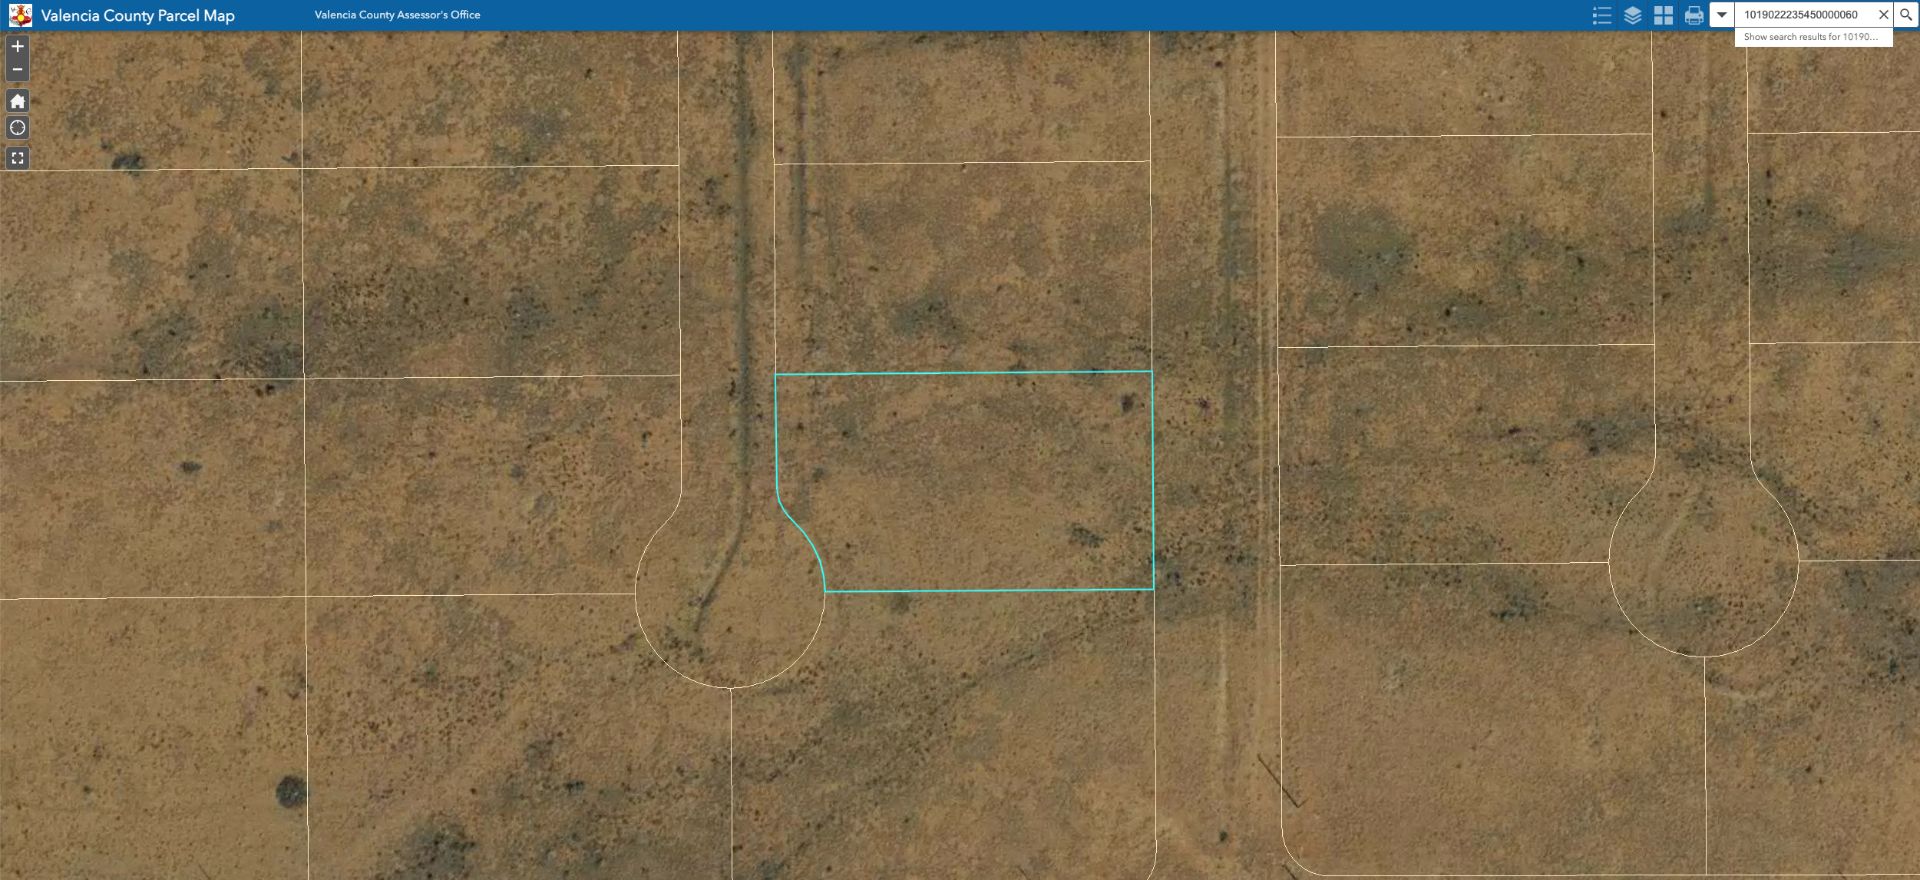 Invest in Land in Canyon Del Rio in Valencia County, New Mexico! - Image 2 of 10